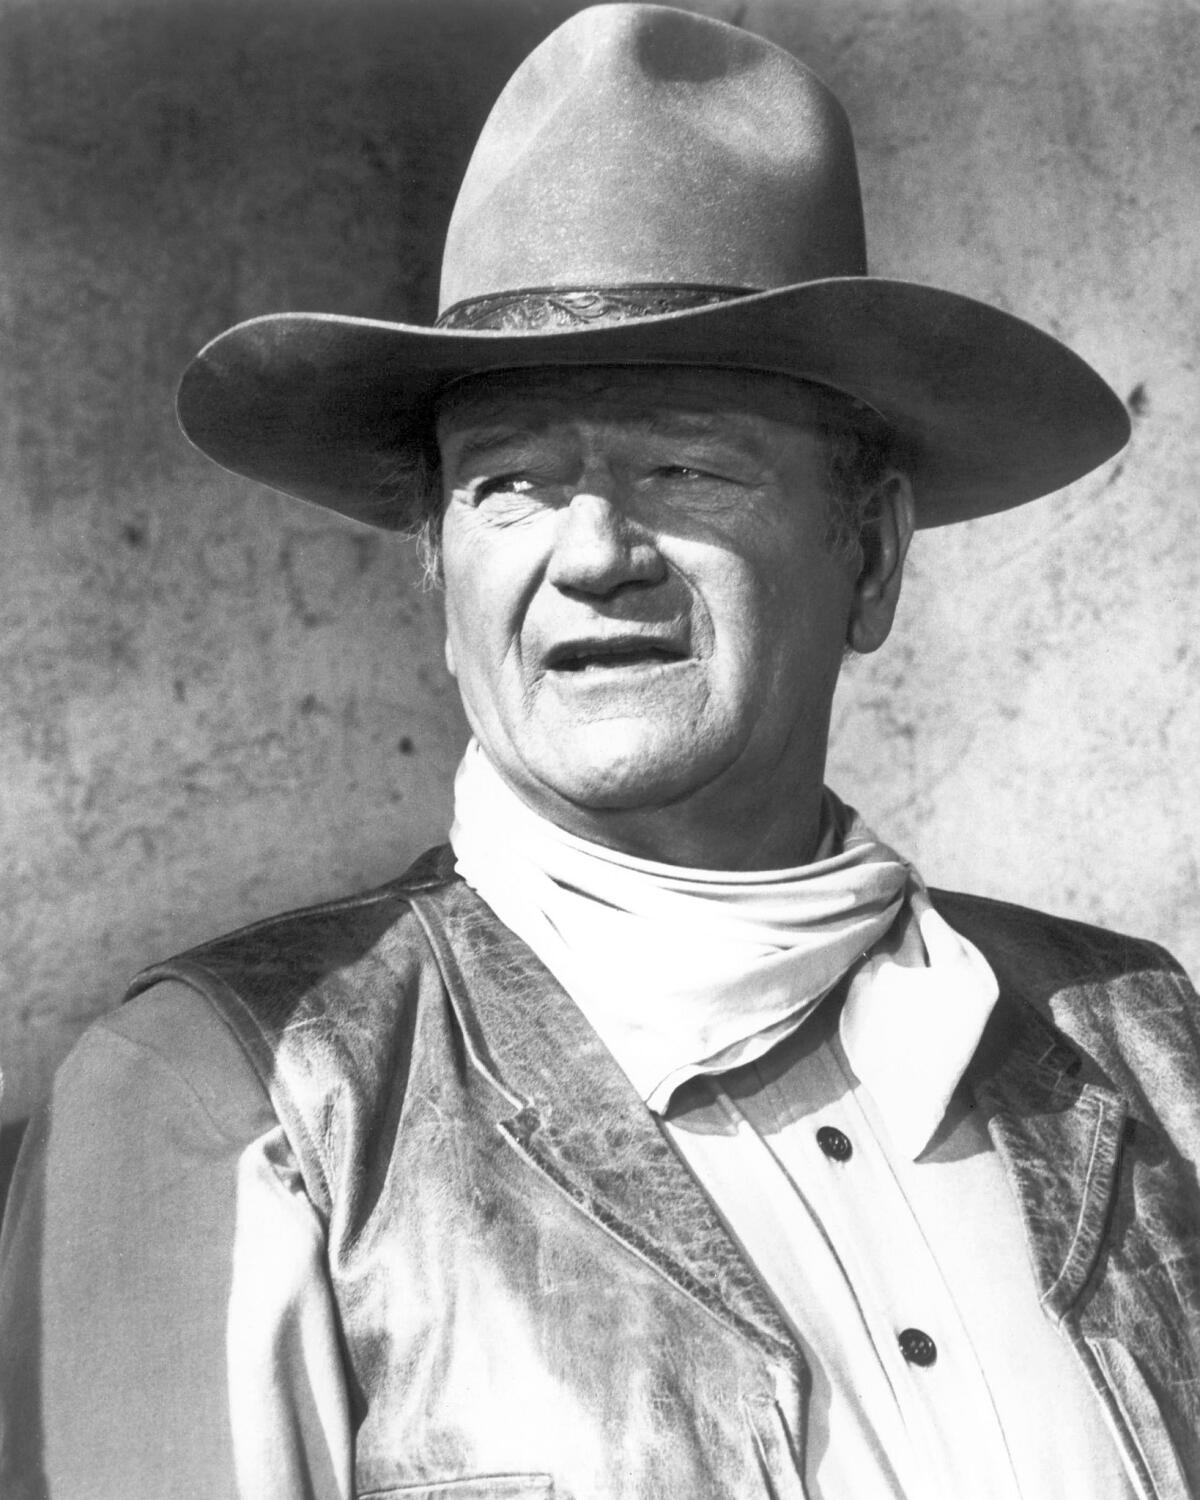 John Wayne is pictured in "Rio Lobo," a film from 1970.